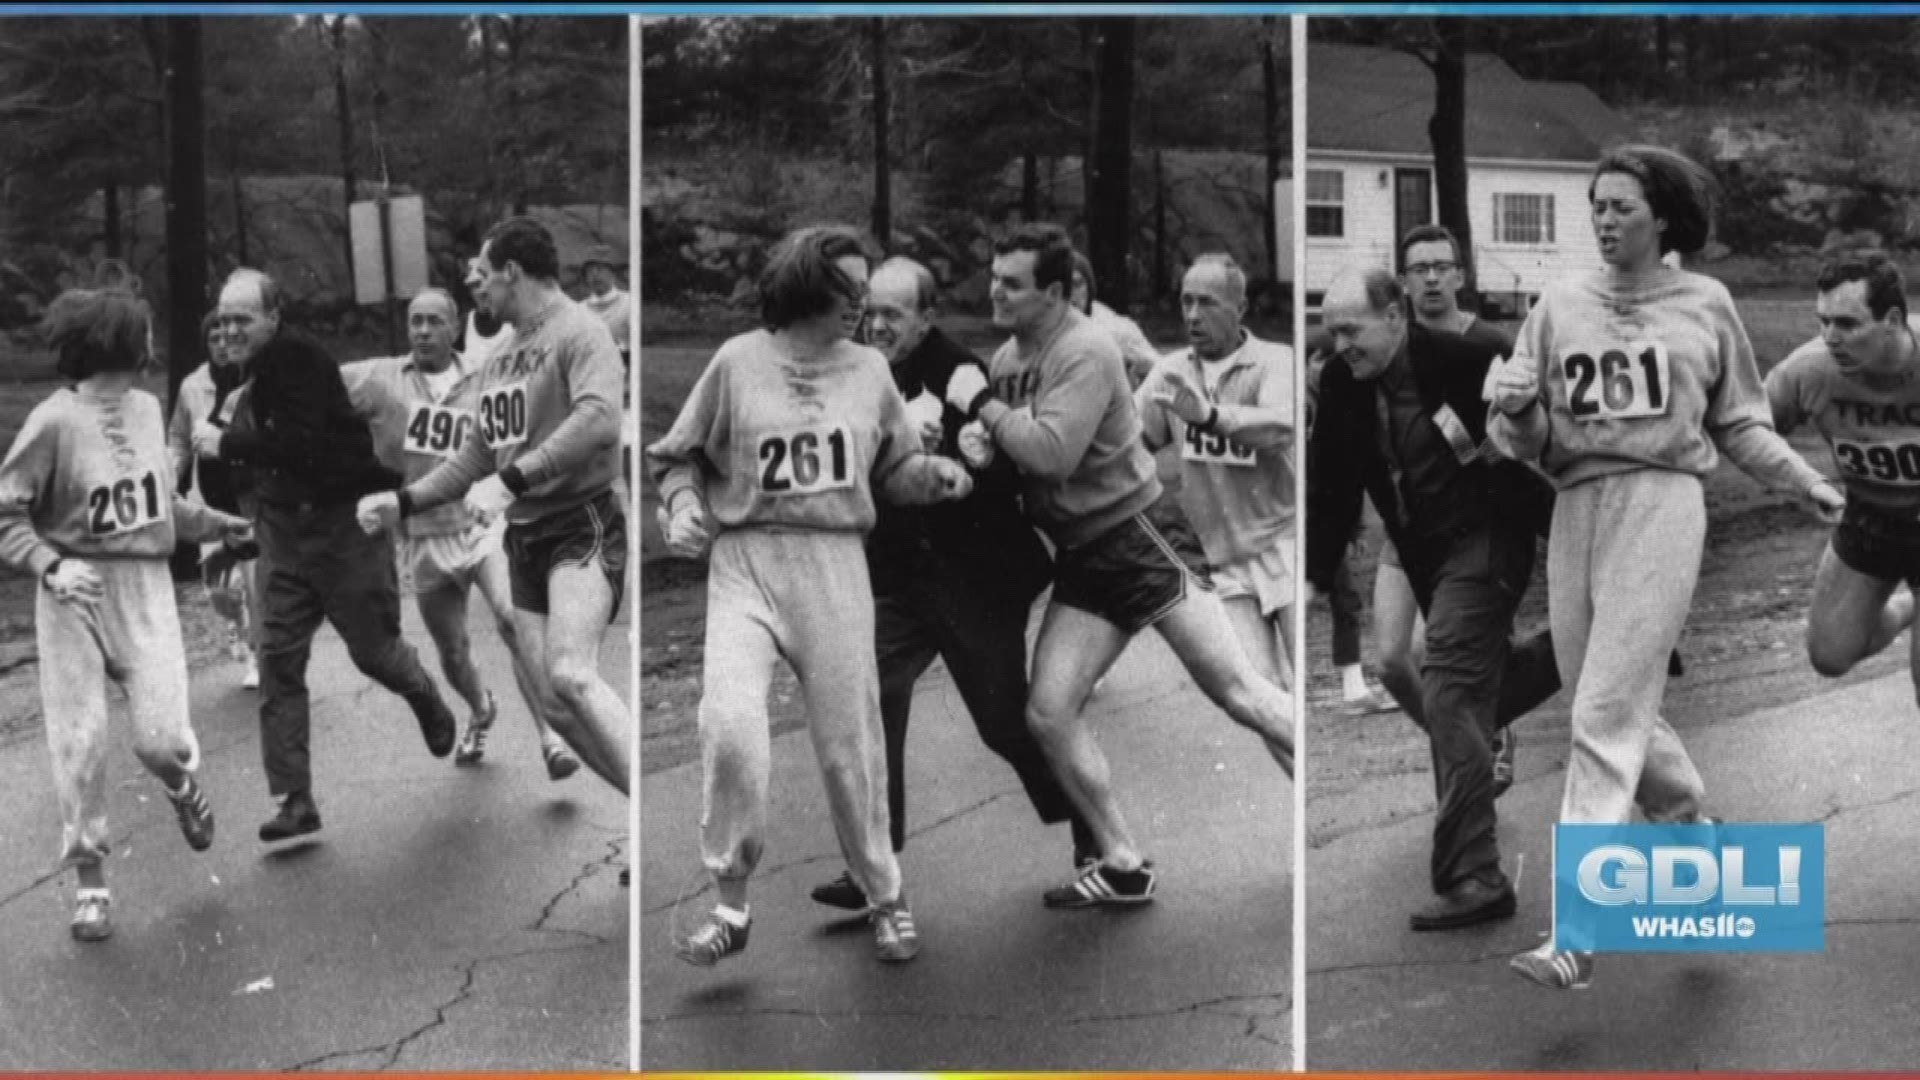 Katherine Switzer was the first woman to officially enter and run the Boston Marathon in the late 1960s, when only men were encouraged to run. She finished, despite attempts to physically block her from the course. Katherine is still an avid runner and stopped by Great Day Live to talk about the iconic Louisville race she is taking part in.